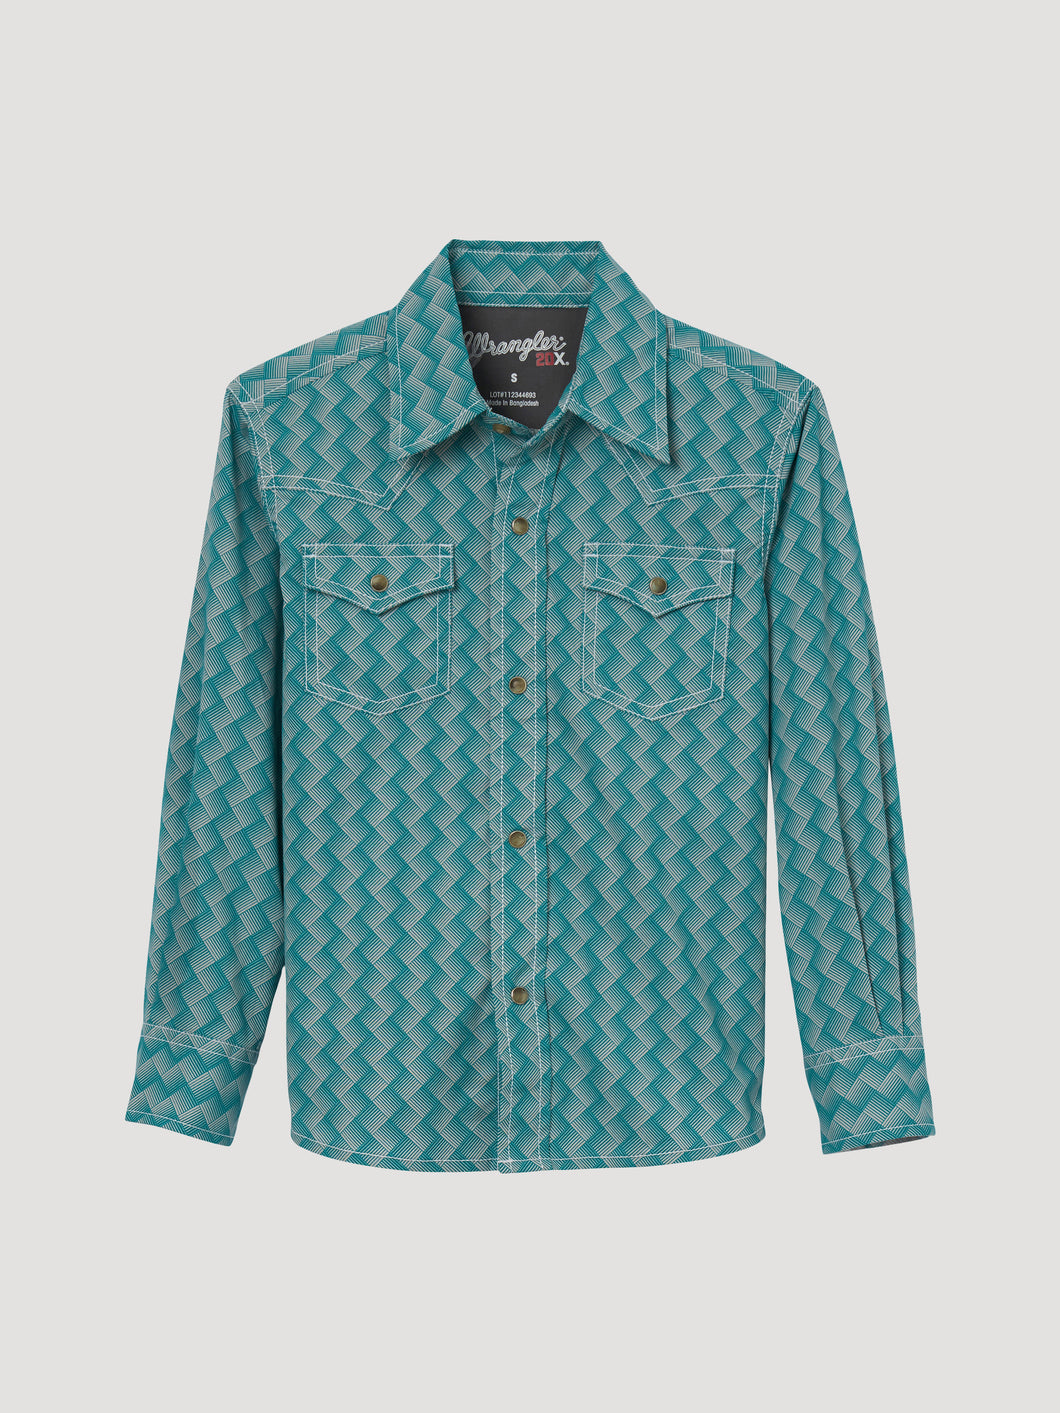 Pard's Western Shop Boy's Wrangler 20X Competition Advanced Comfort Green/White Weave Print Western Snap Shirt